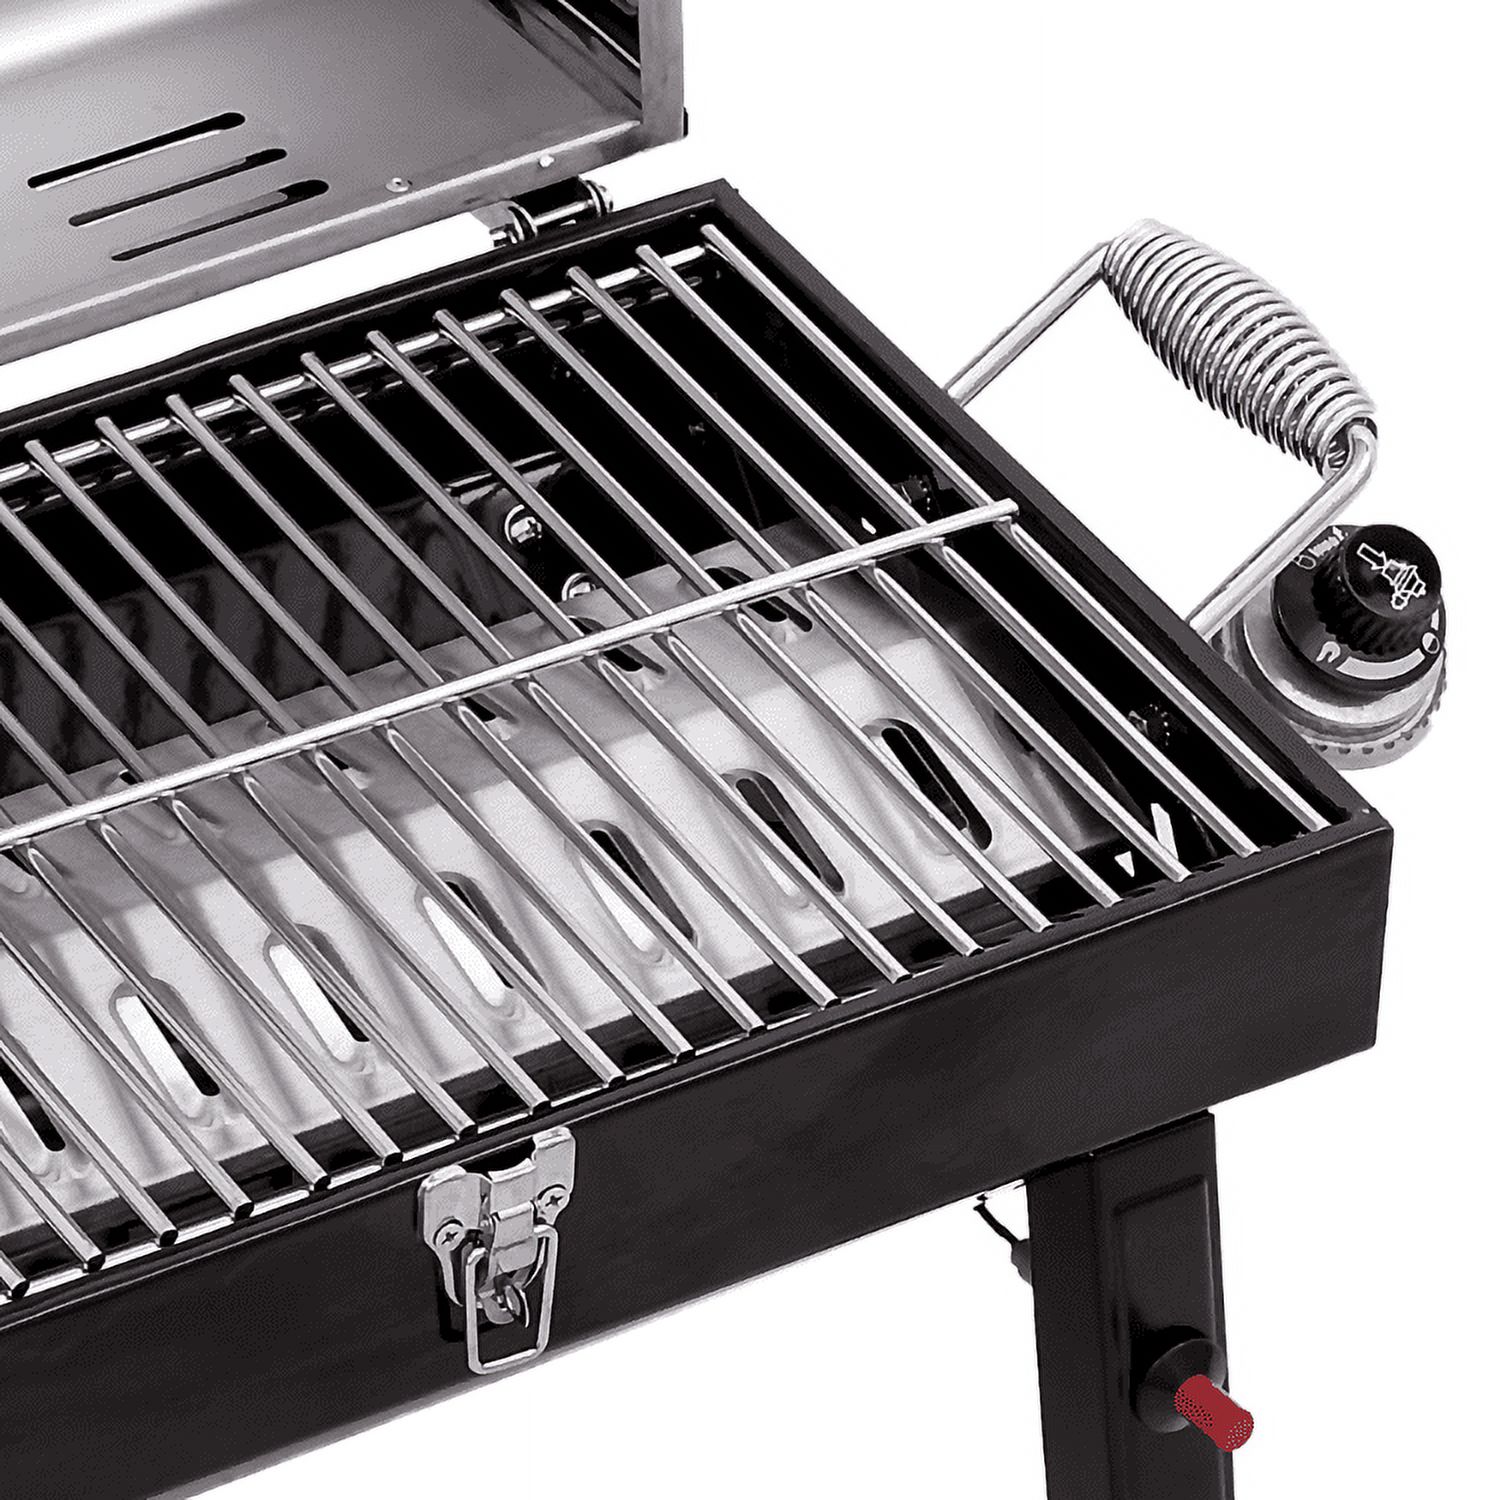 Char-Broil 200 Liquid Propane, (LP), Portable Stainless Steel Gas Grill - image 6 of 8